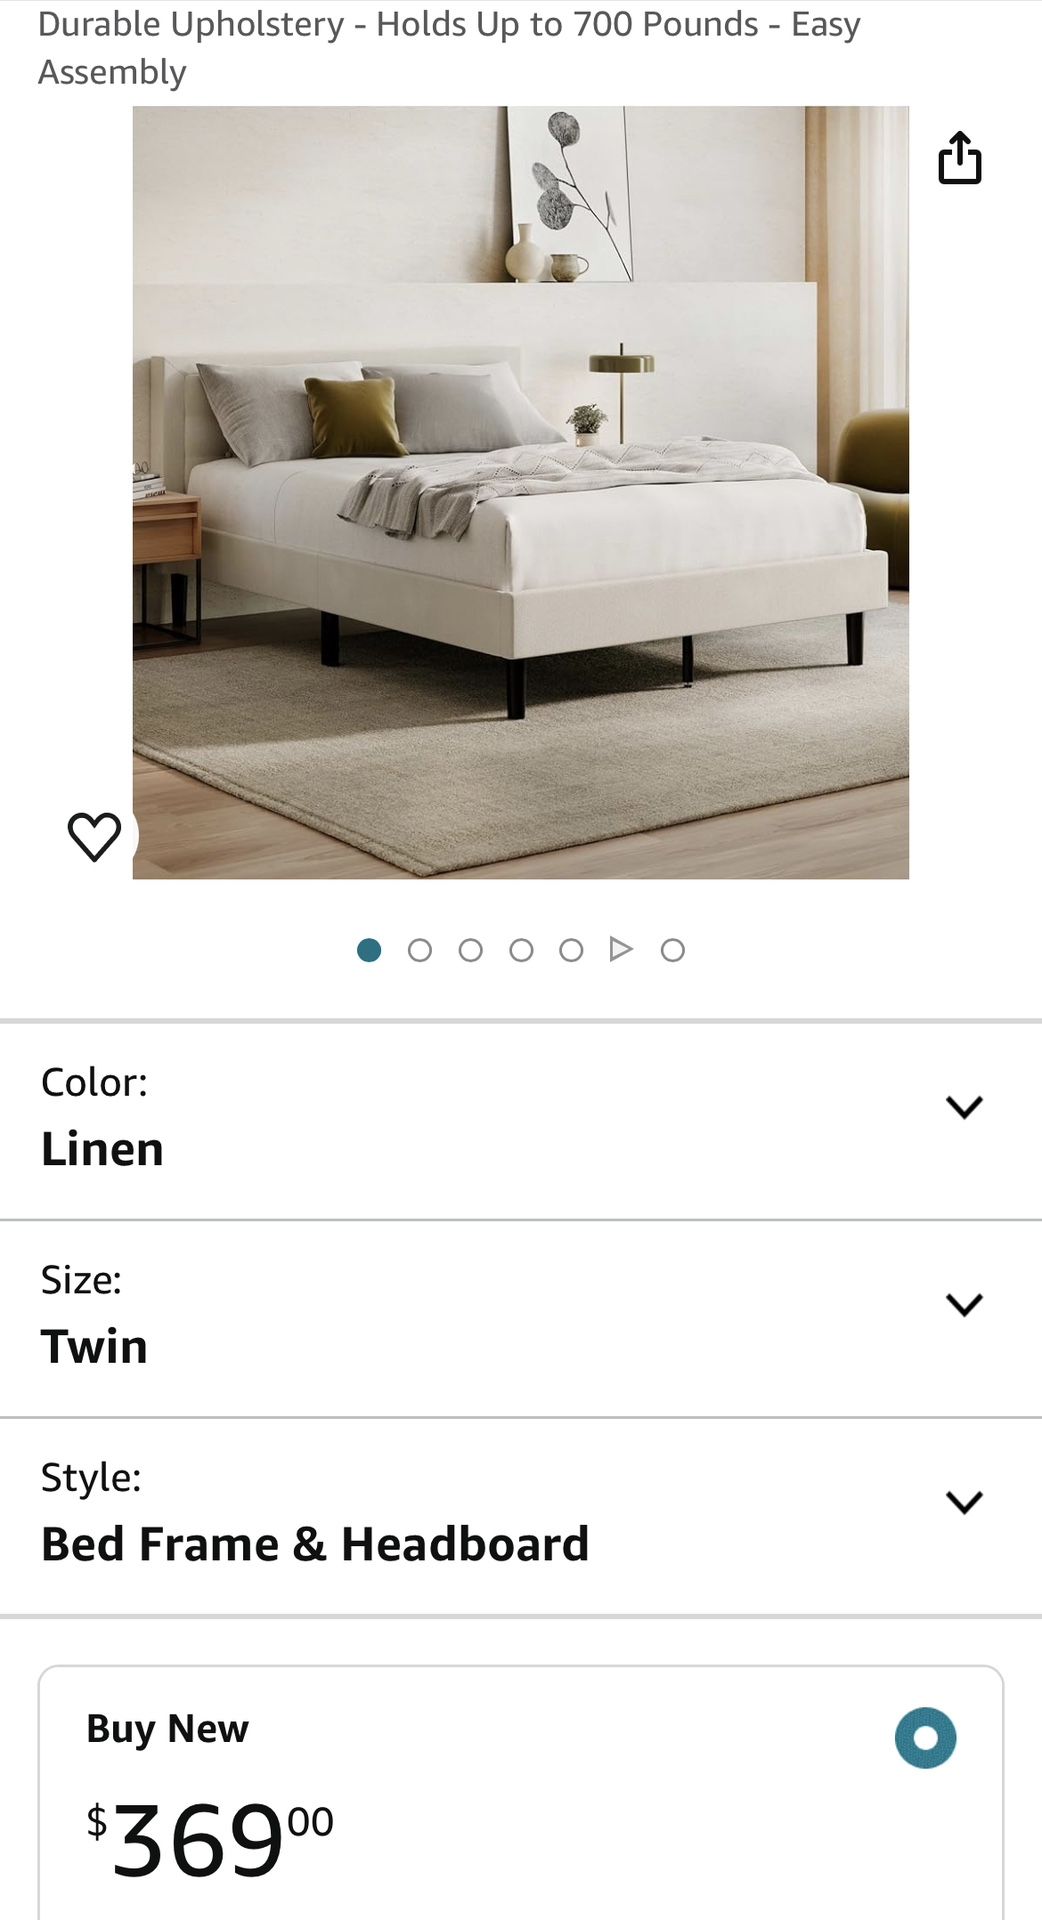 Nectar Bed Frame & Headboard - Linen - Twin - 8 Inch Legs and Sturdy Wooden Slats for Support - Contemporary and Durable Upholstery - Holds Up to 700 